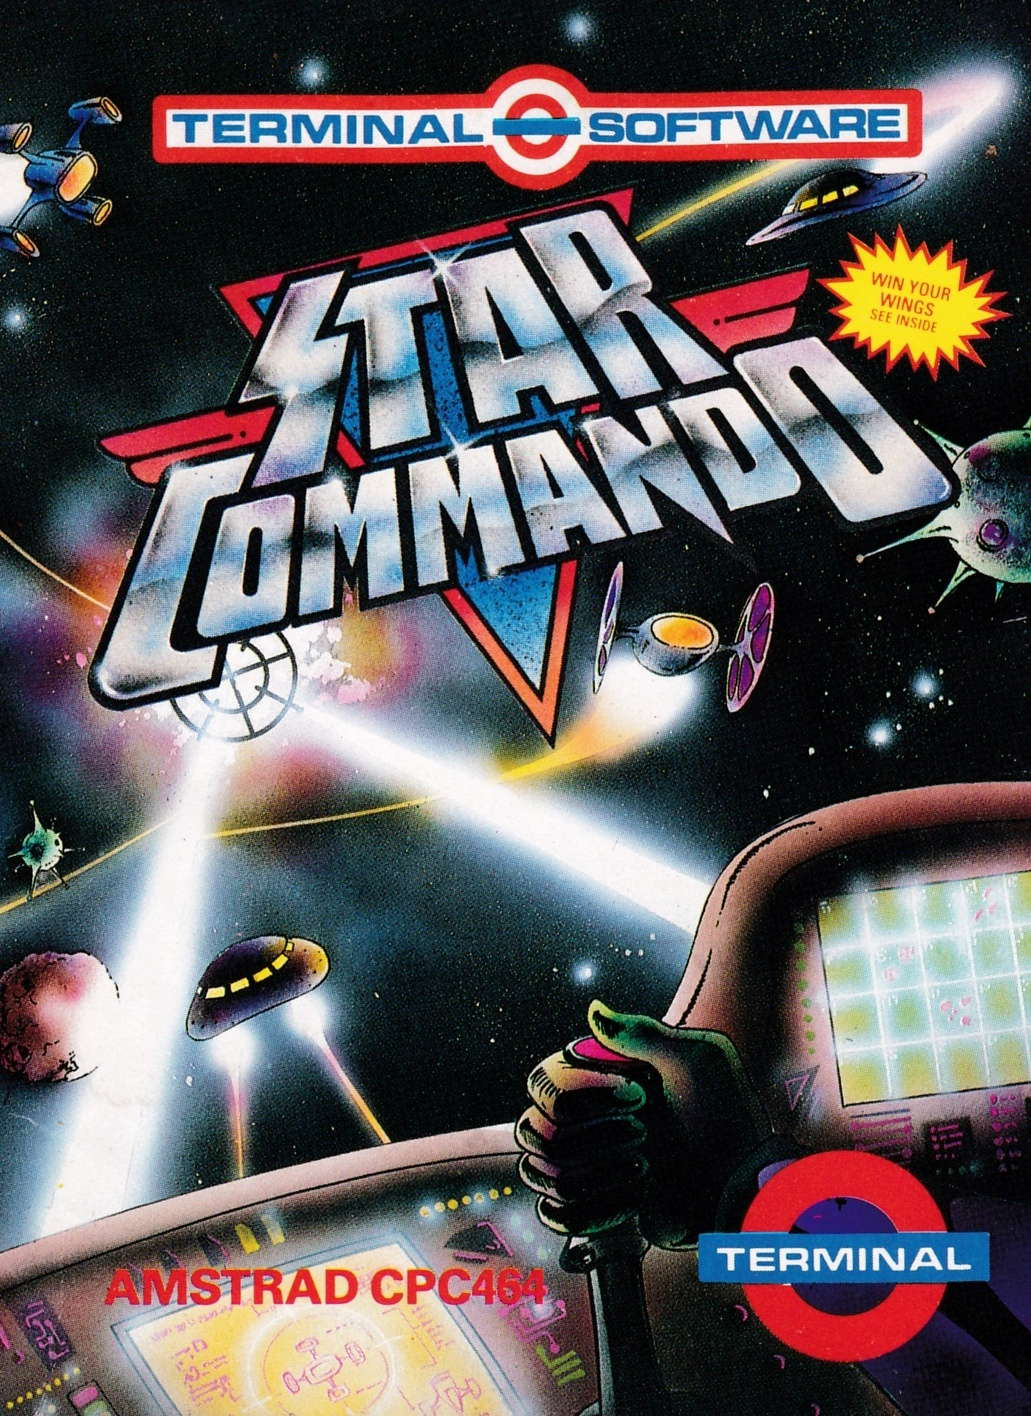 cover of the Amstrad CPC game Star Commando  by GameBase CPC